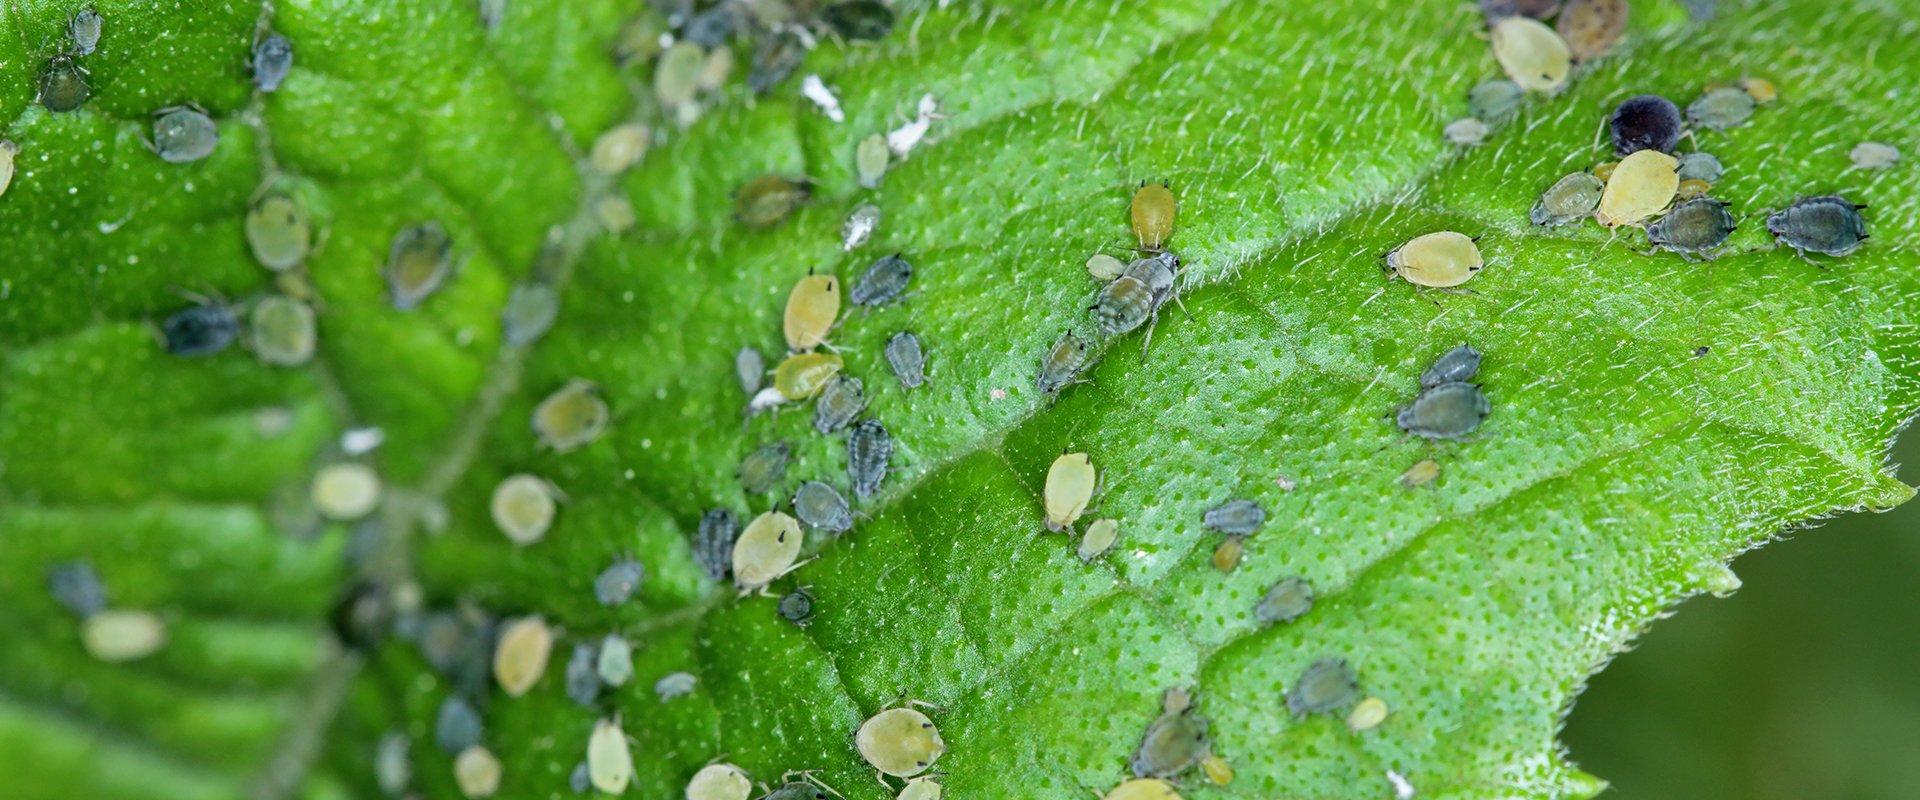 many aphids on a leaf